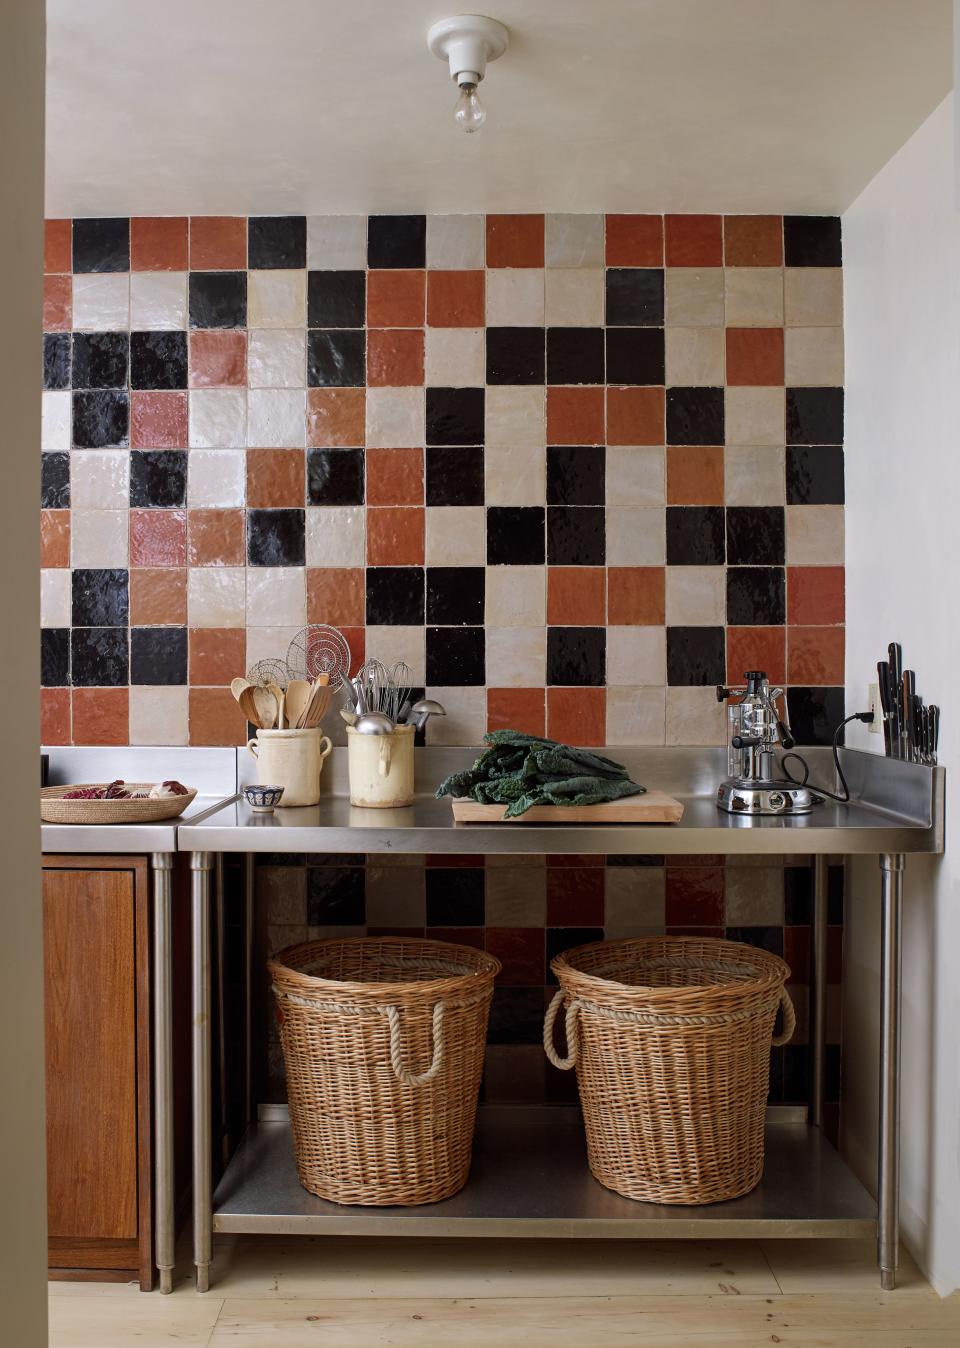 A section of the kitchen was covered in six-inch Moroccan tiles from Mosaic House. Tedhams chose three different colors and asked that they be placed in a random pattern, a task that turned out to be harder than expected. “In the end it wasn’t really that random,” she says. “Because we had to make sure that the colors were spread out in a way that made sense.” On the stainless-steel tables, we see a Pavoni espresso machine and an ebonized walnut dish rack designed by Tedhams.